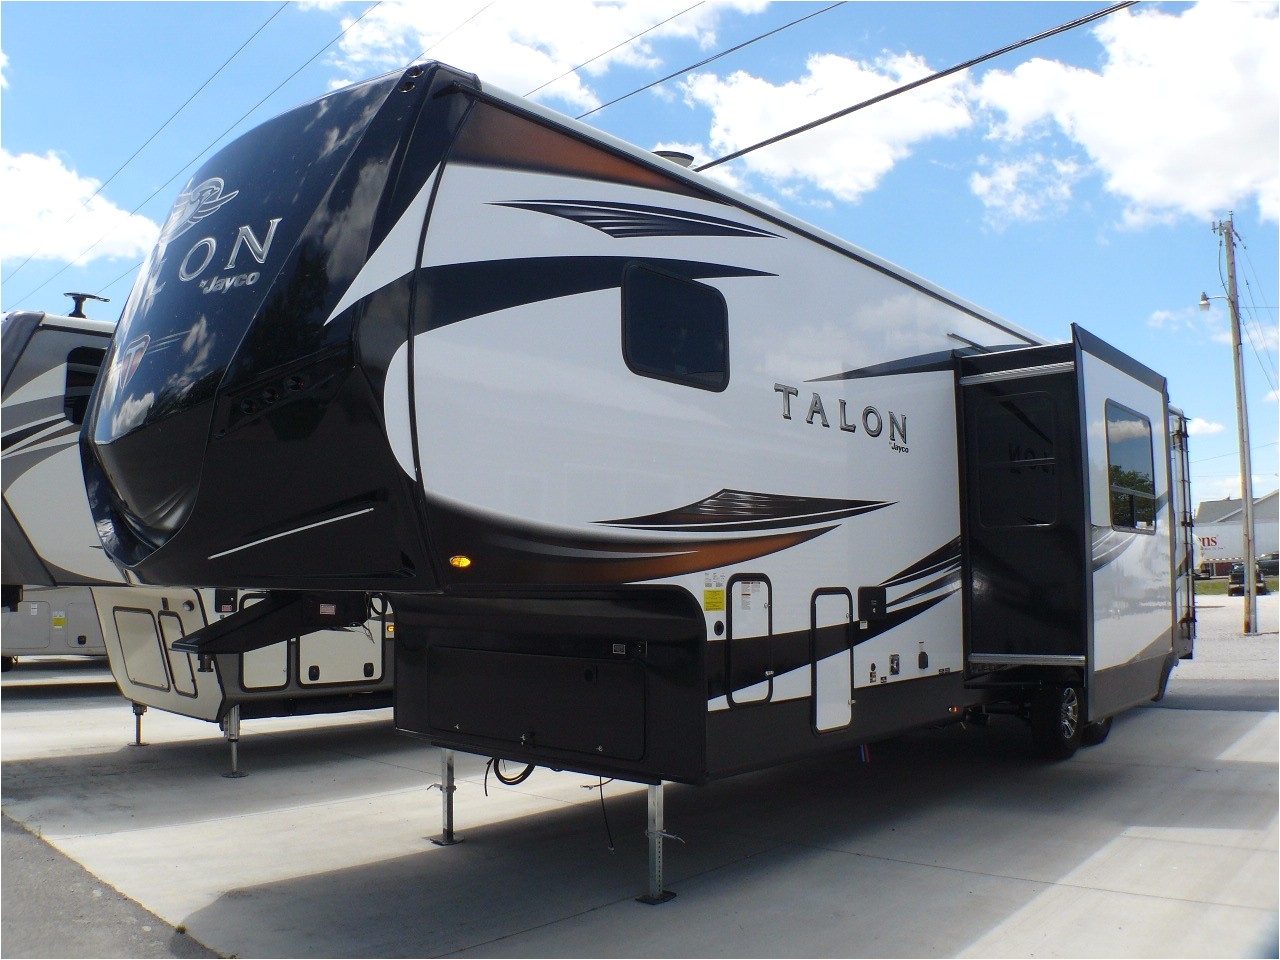 2 Bedroom Campers for Sale In Pa Jayco Talon 313t Fifth Wheel Rvs for Sale 101 Rvs Rvtrader Com